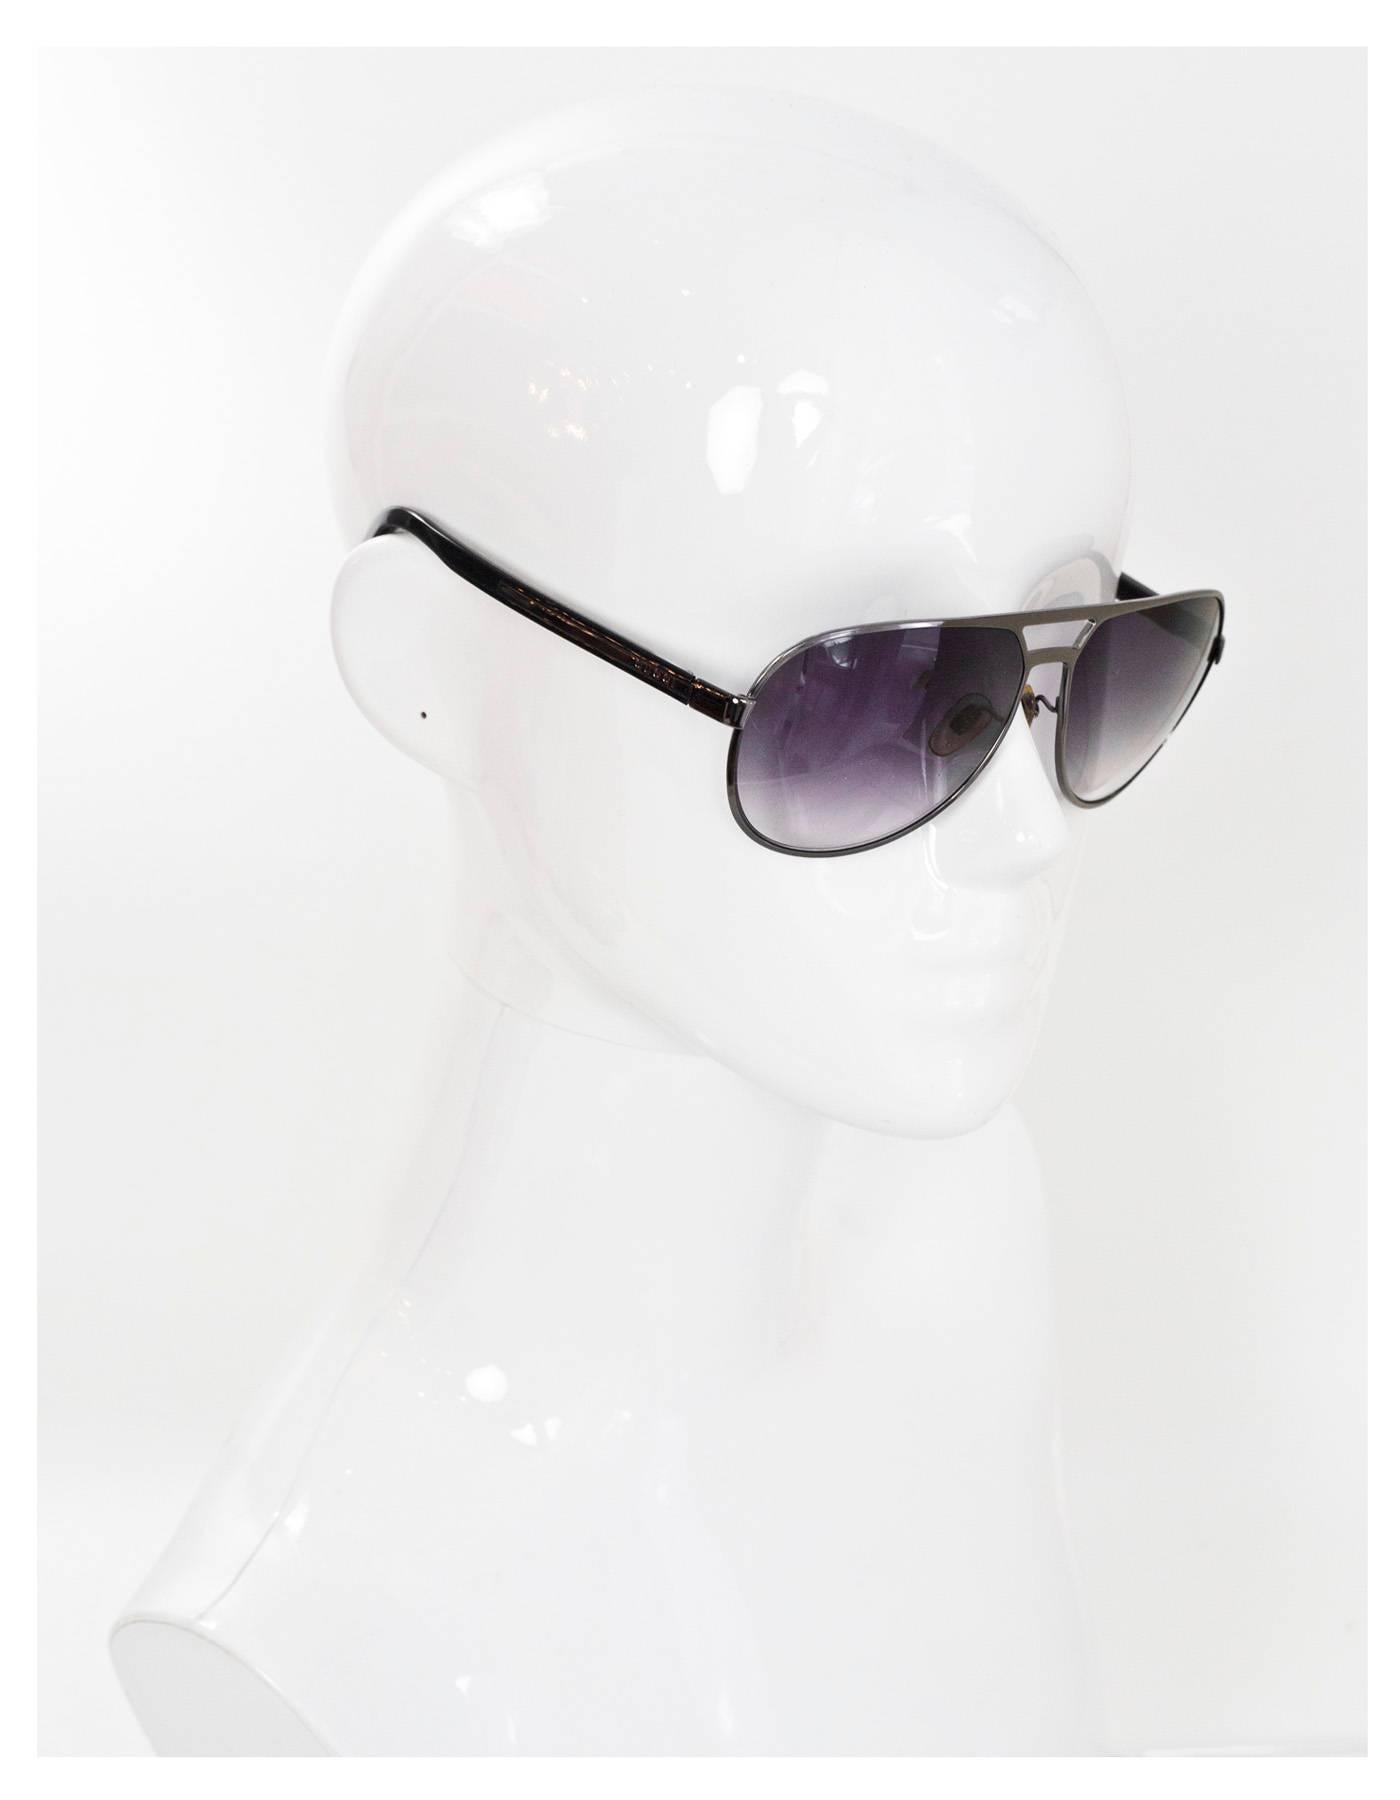 Gucci Black Aviator Sunglasses

Made In: Italy
Color: Black
Materials: Resin, metal
Overall Condition: Excellent pre-owned condition

Measurements:
Length Across: 5.55"
Lense: 2.5"
Arms: .5"